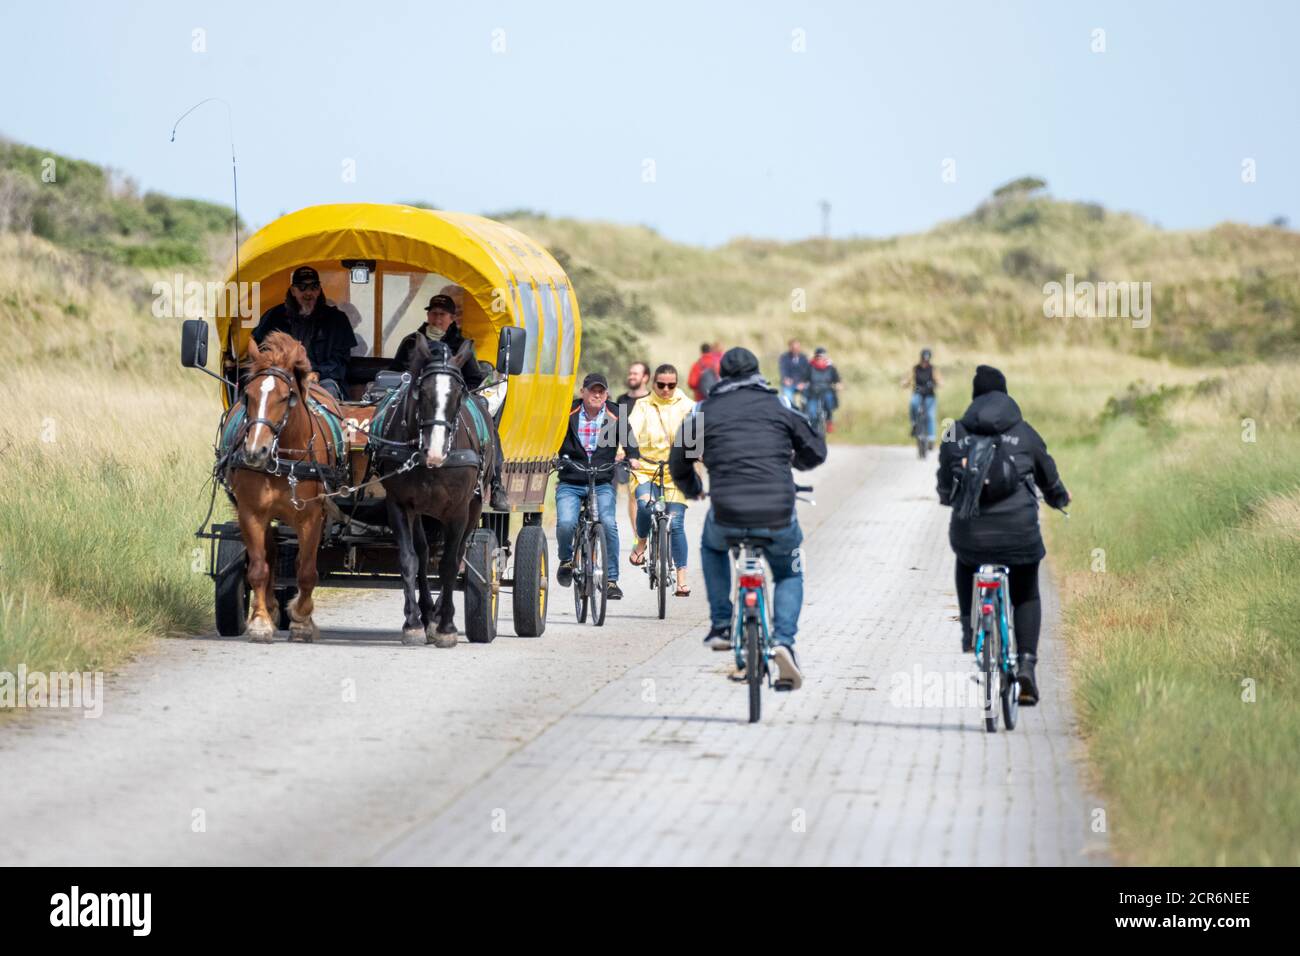 Germany, Lower Saxony, Juist, car-free island, covered wagon taxi. Stock Photo